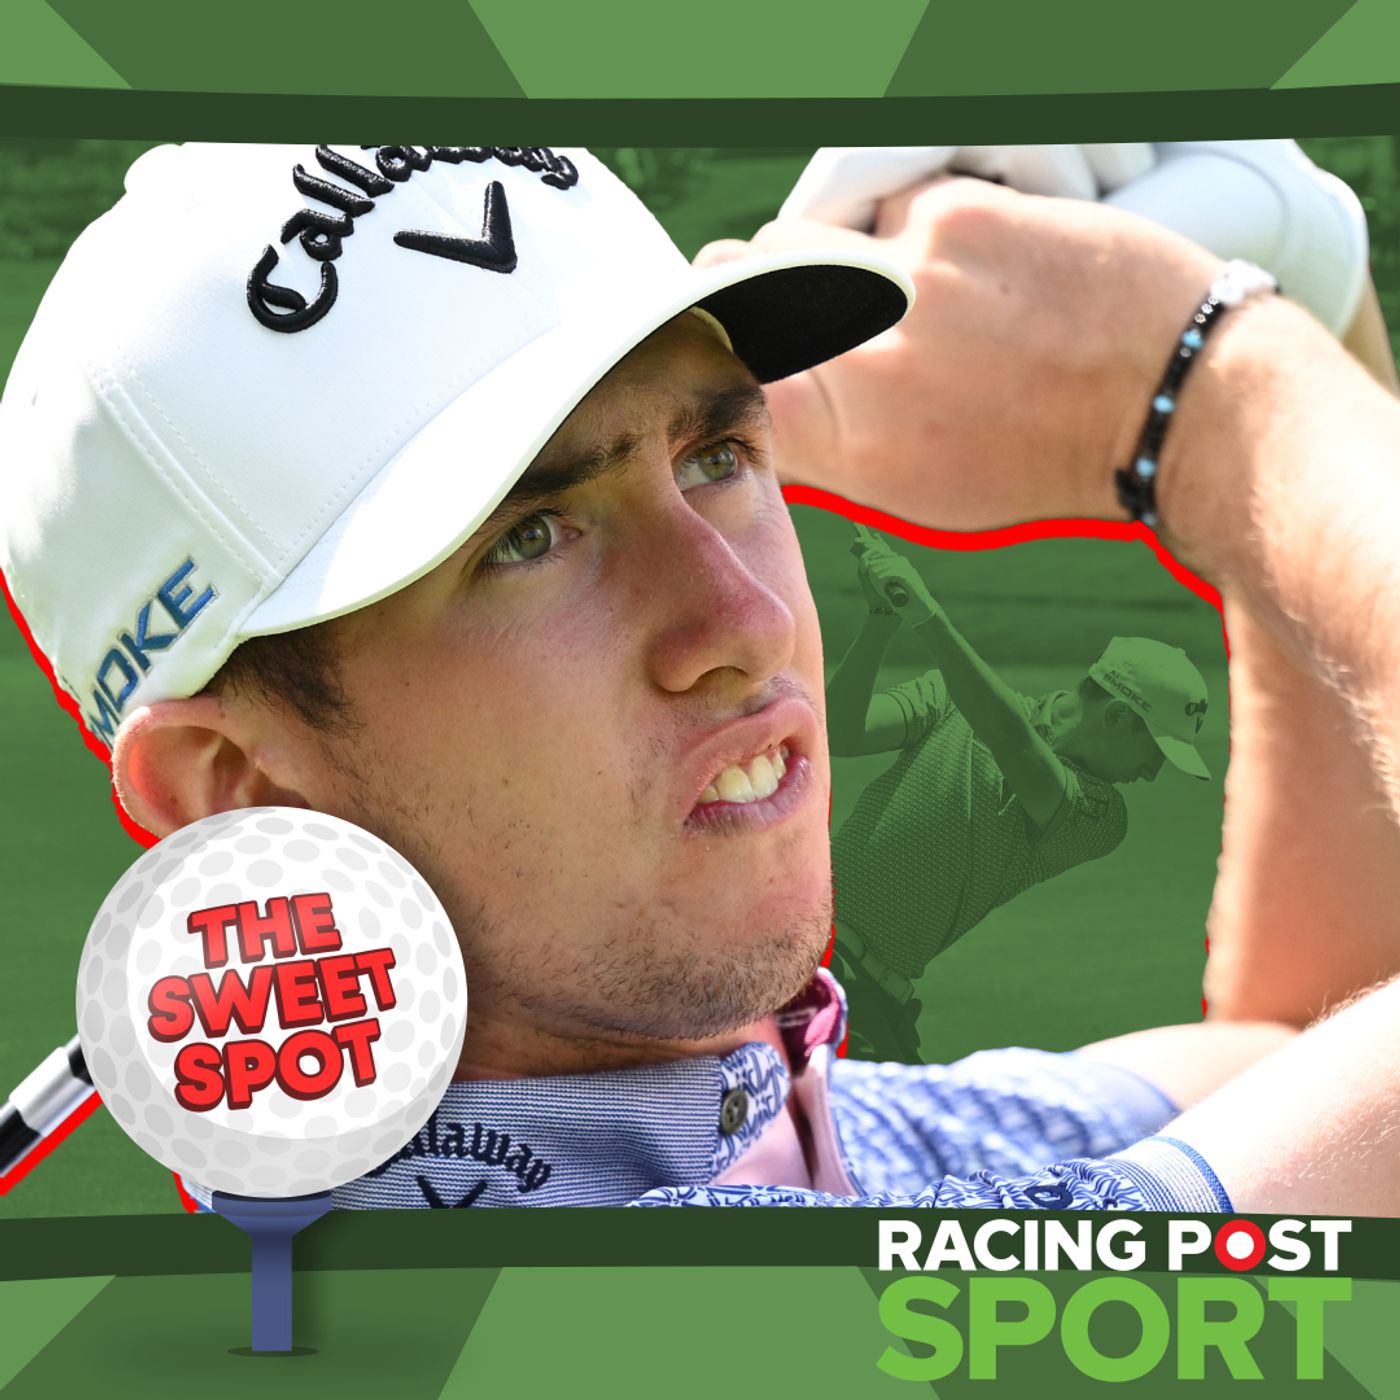 130: The Singapore Classic and Valspar Championship  | Steve Palmer’s Golf Betting Tips | The Sweet Spot